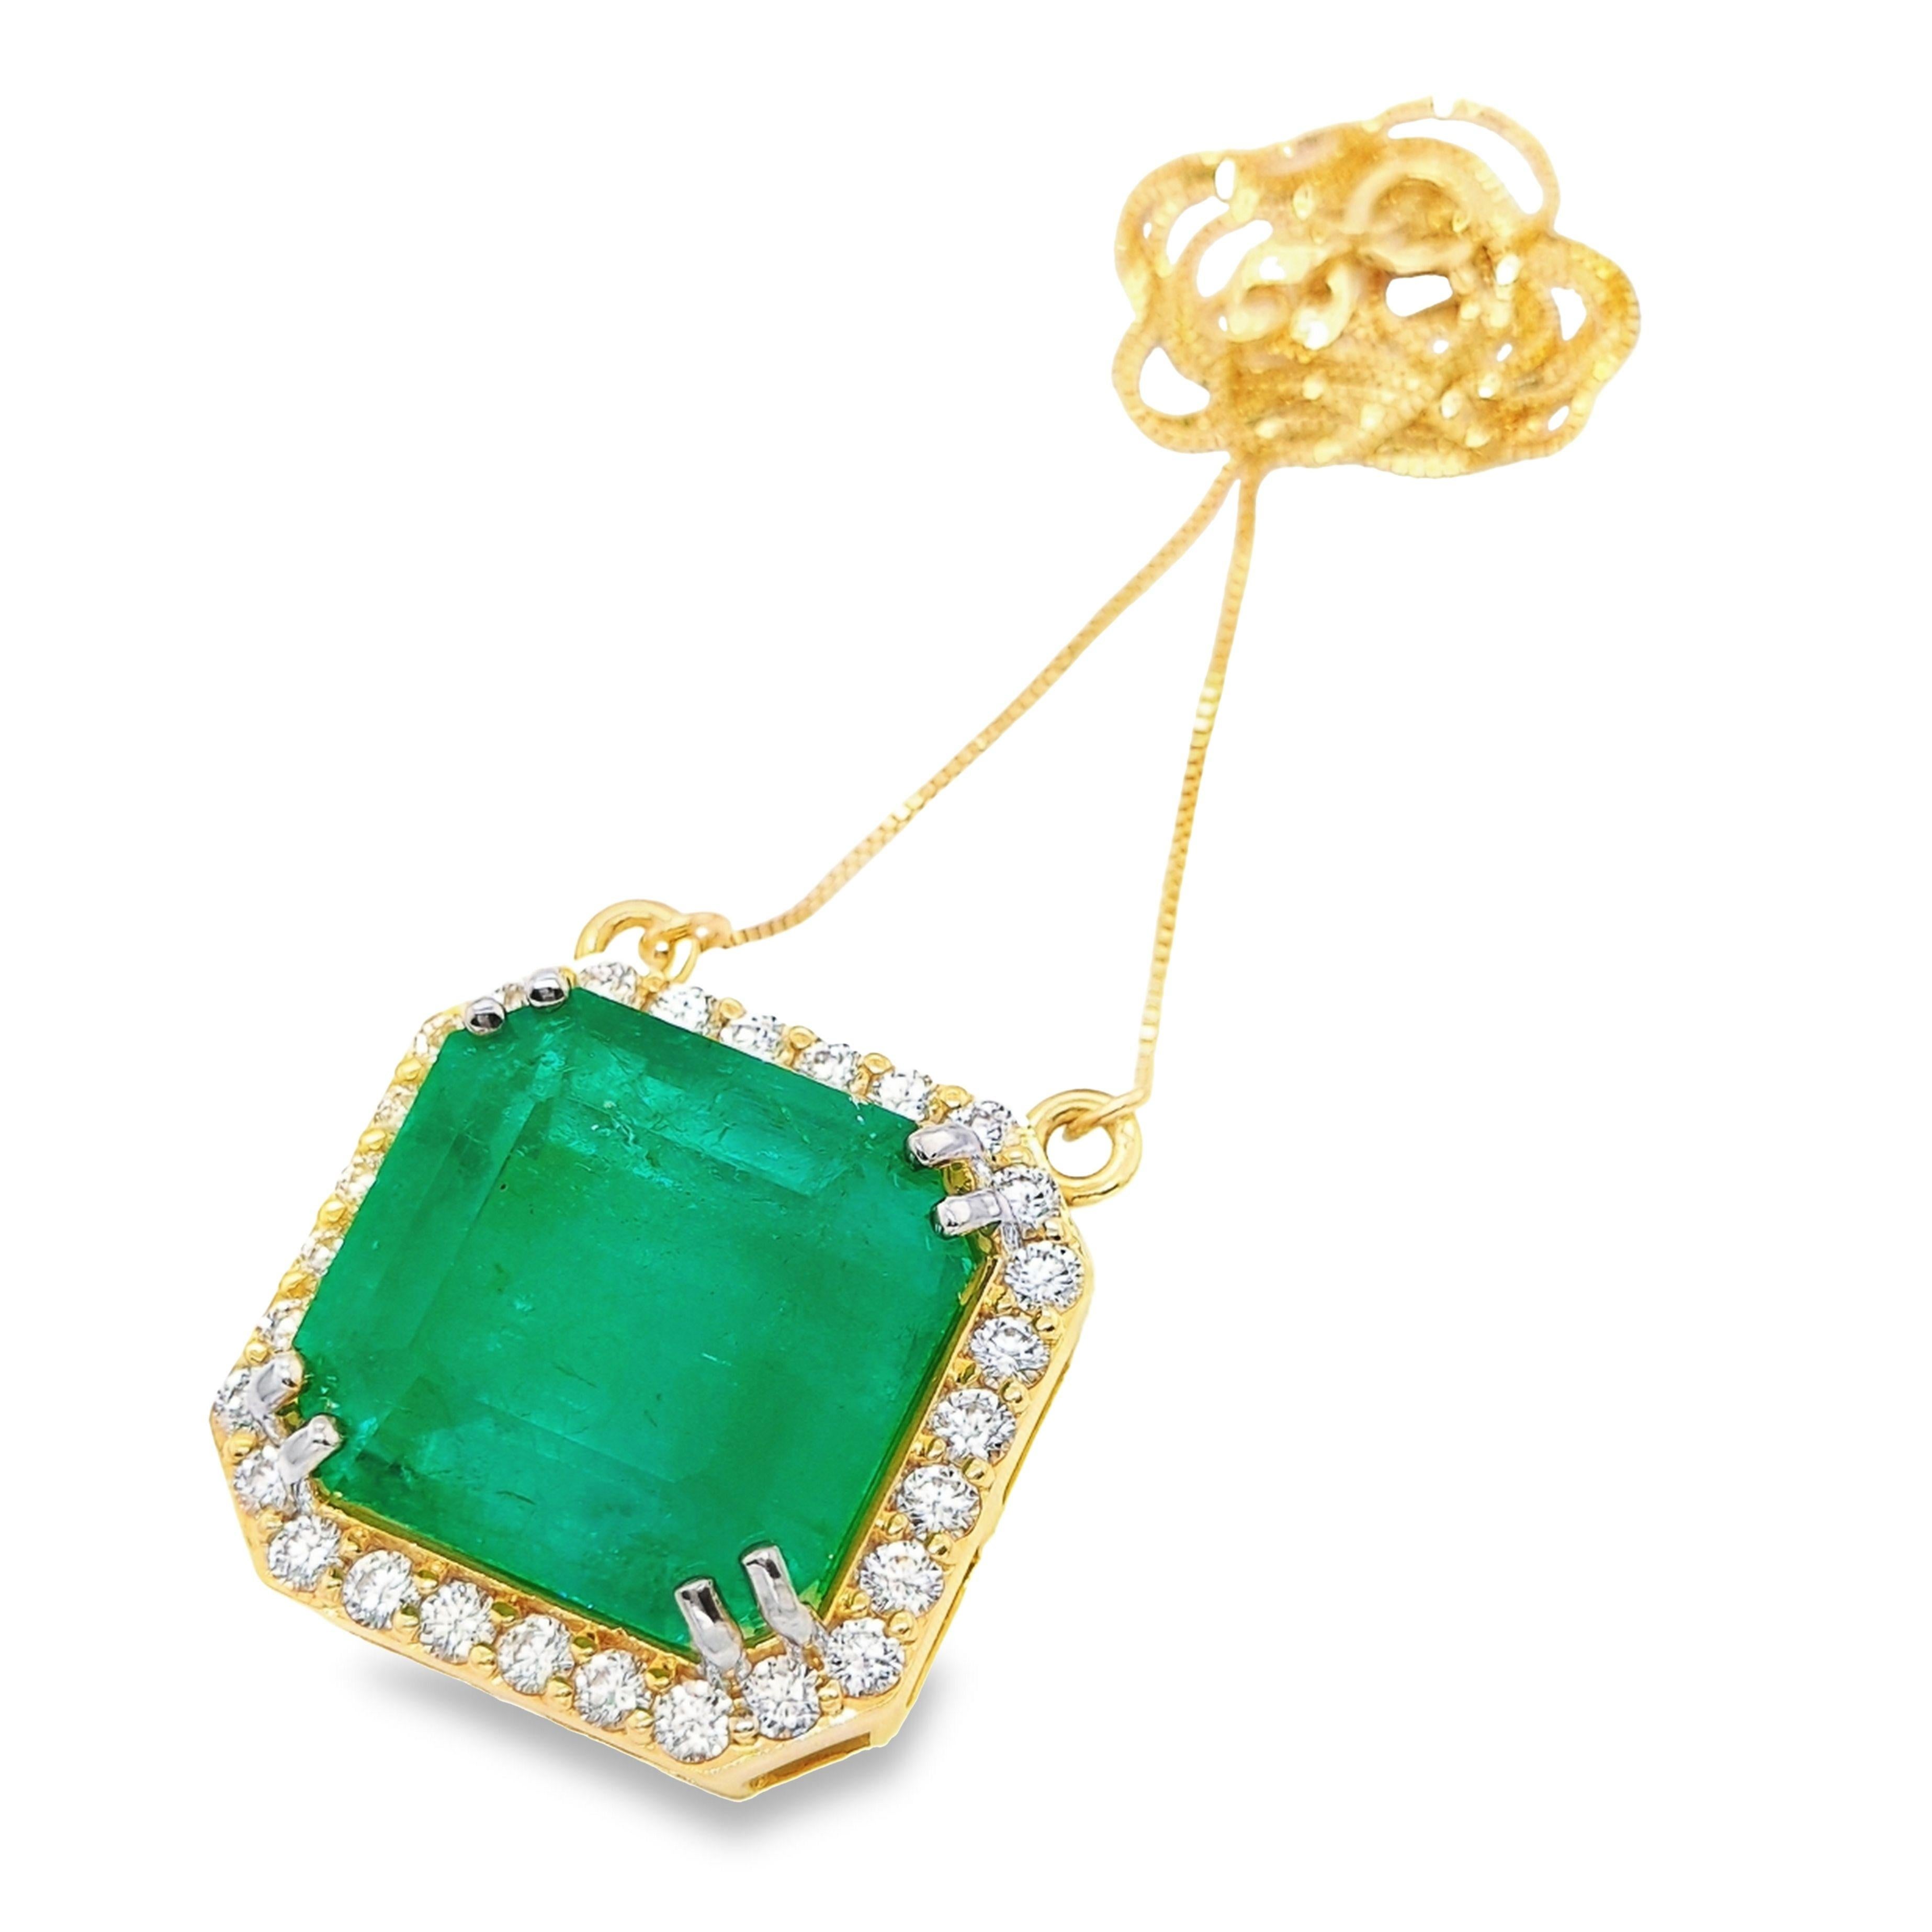 Indulge in absolute luxury with this necklace, featuring an IGI Certified 26.53ct Natural Colombia Emerald and 1.40ct Natural Diamonds set in 18KT yellow gold. The emerald's mesmerizing bluish-green hue is perfectly accented by the celestial sparkle